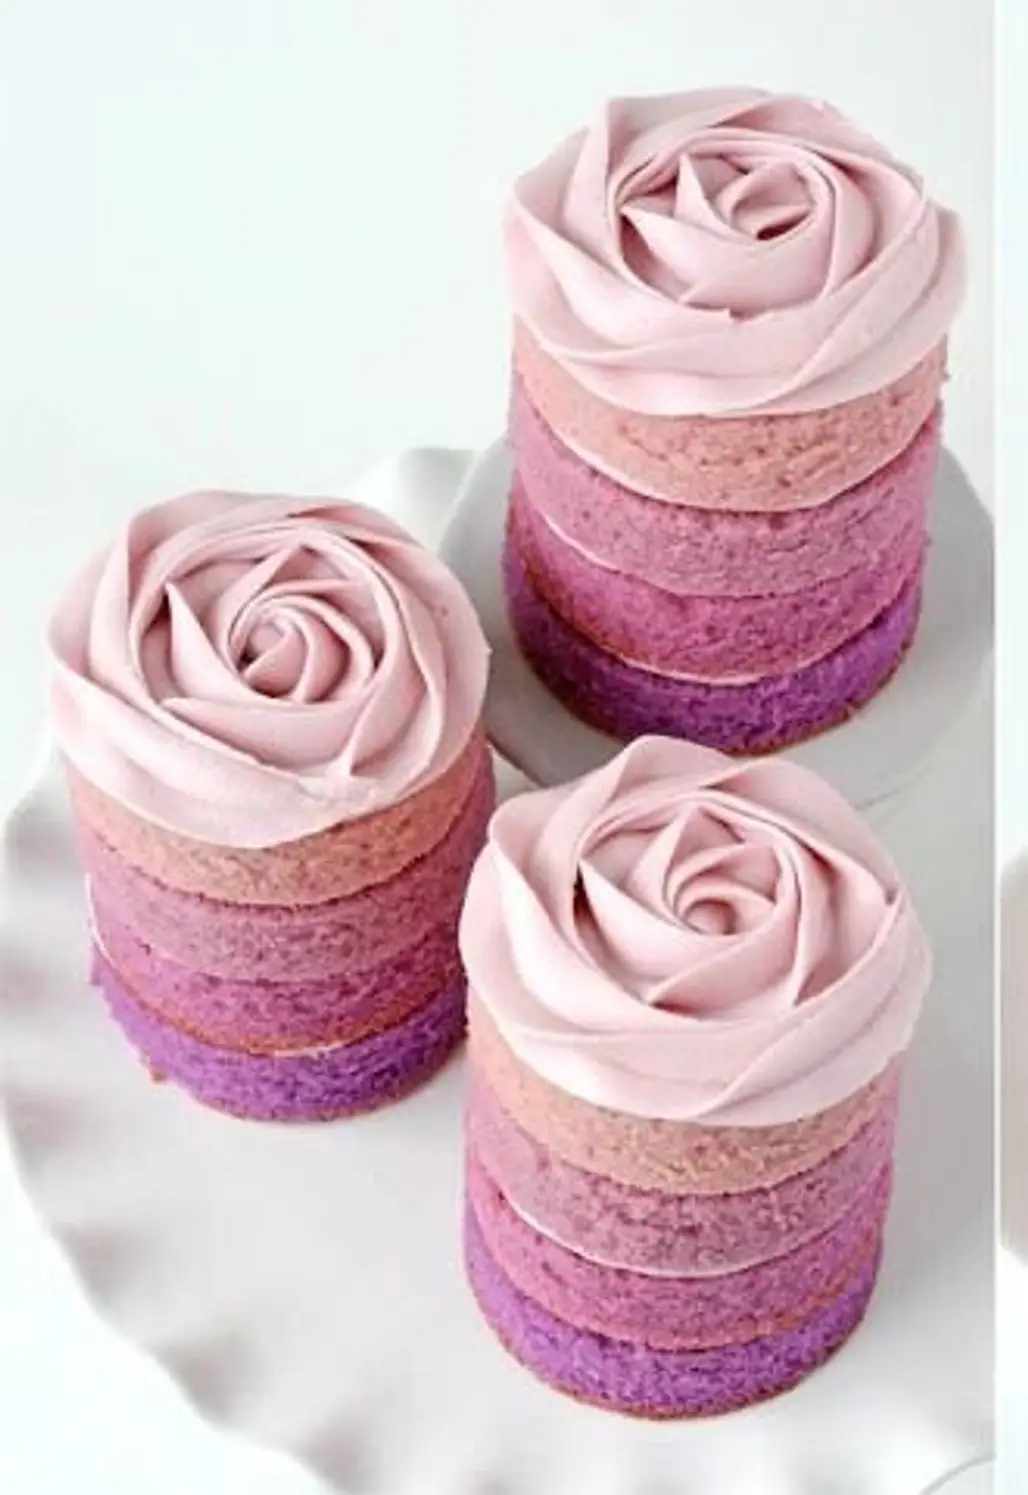 Ombré Stacked Cakes